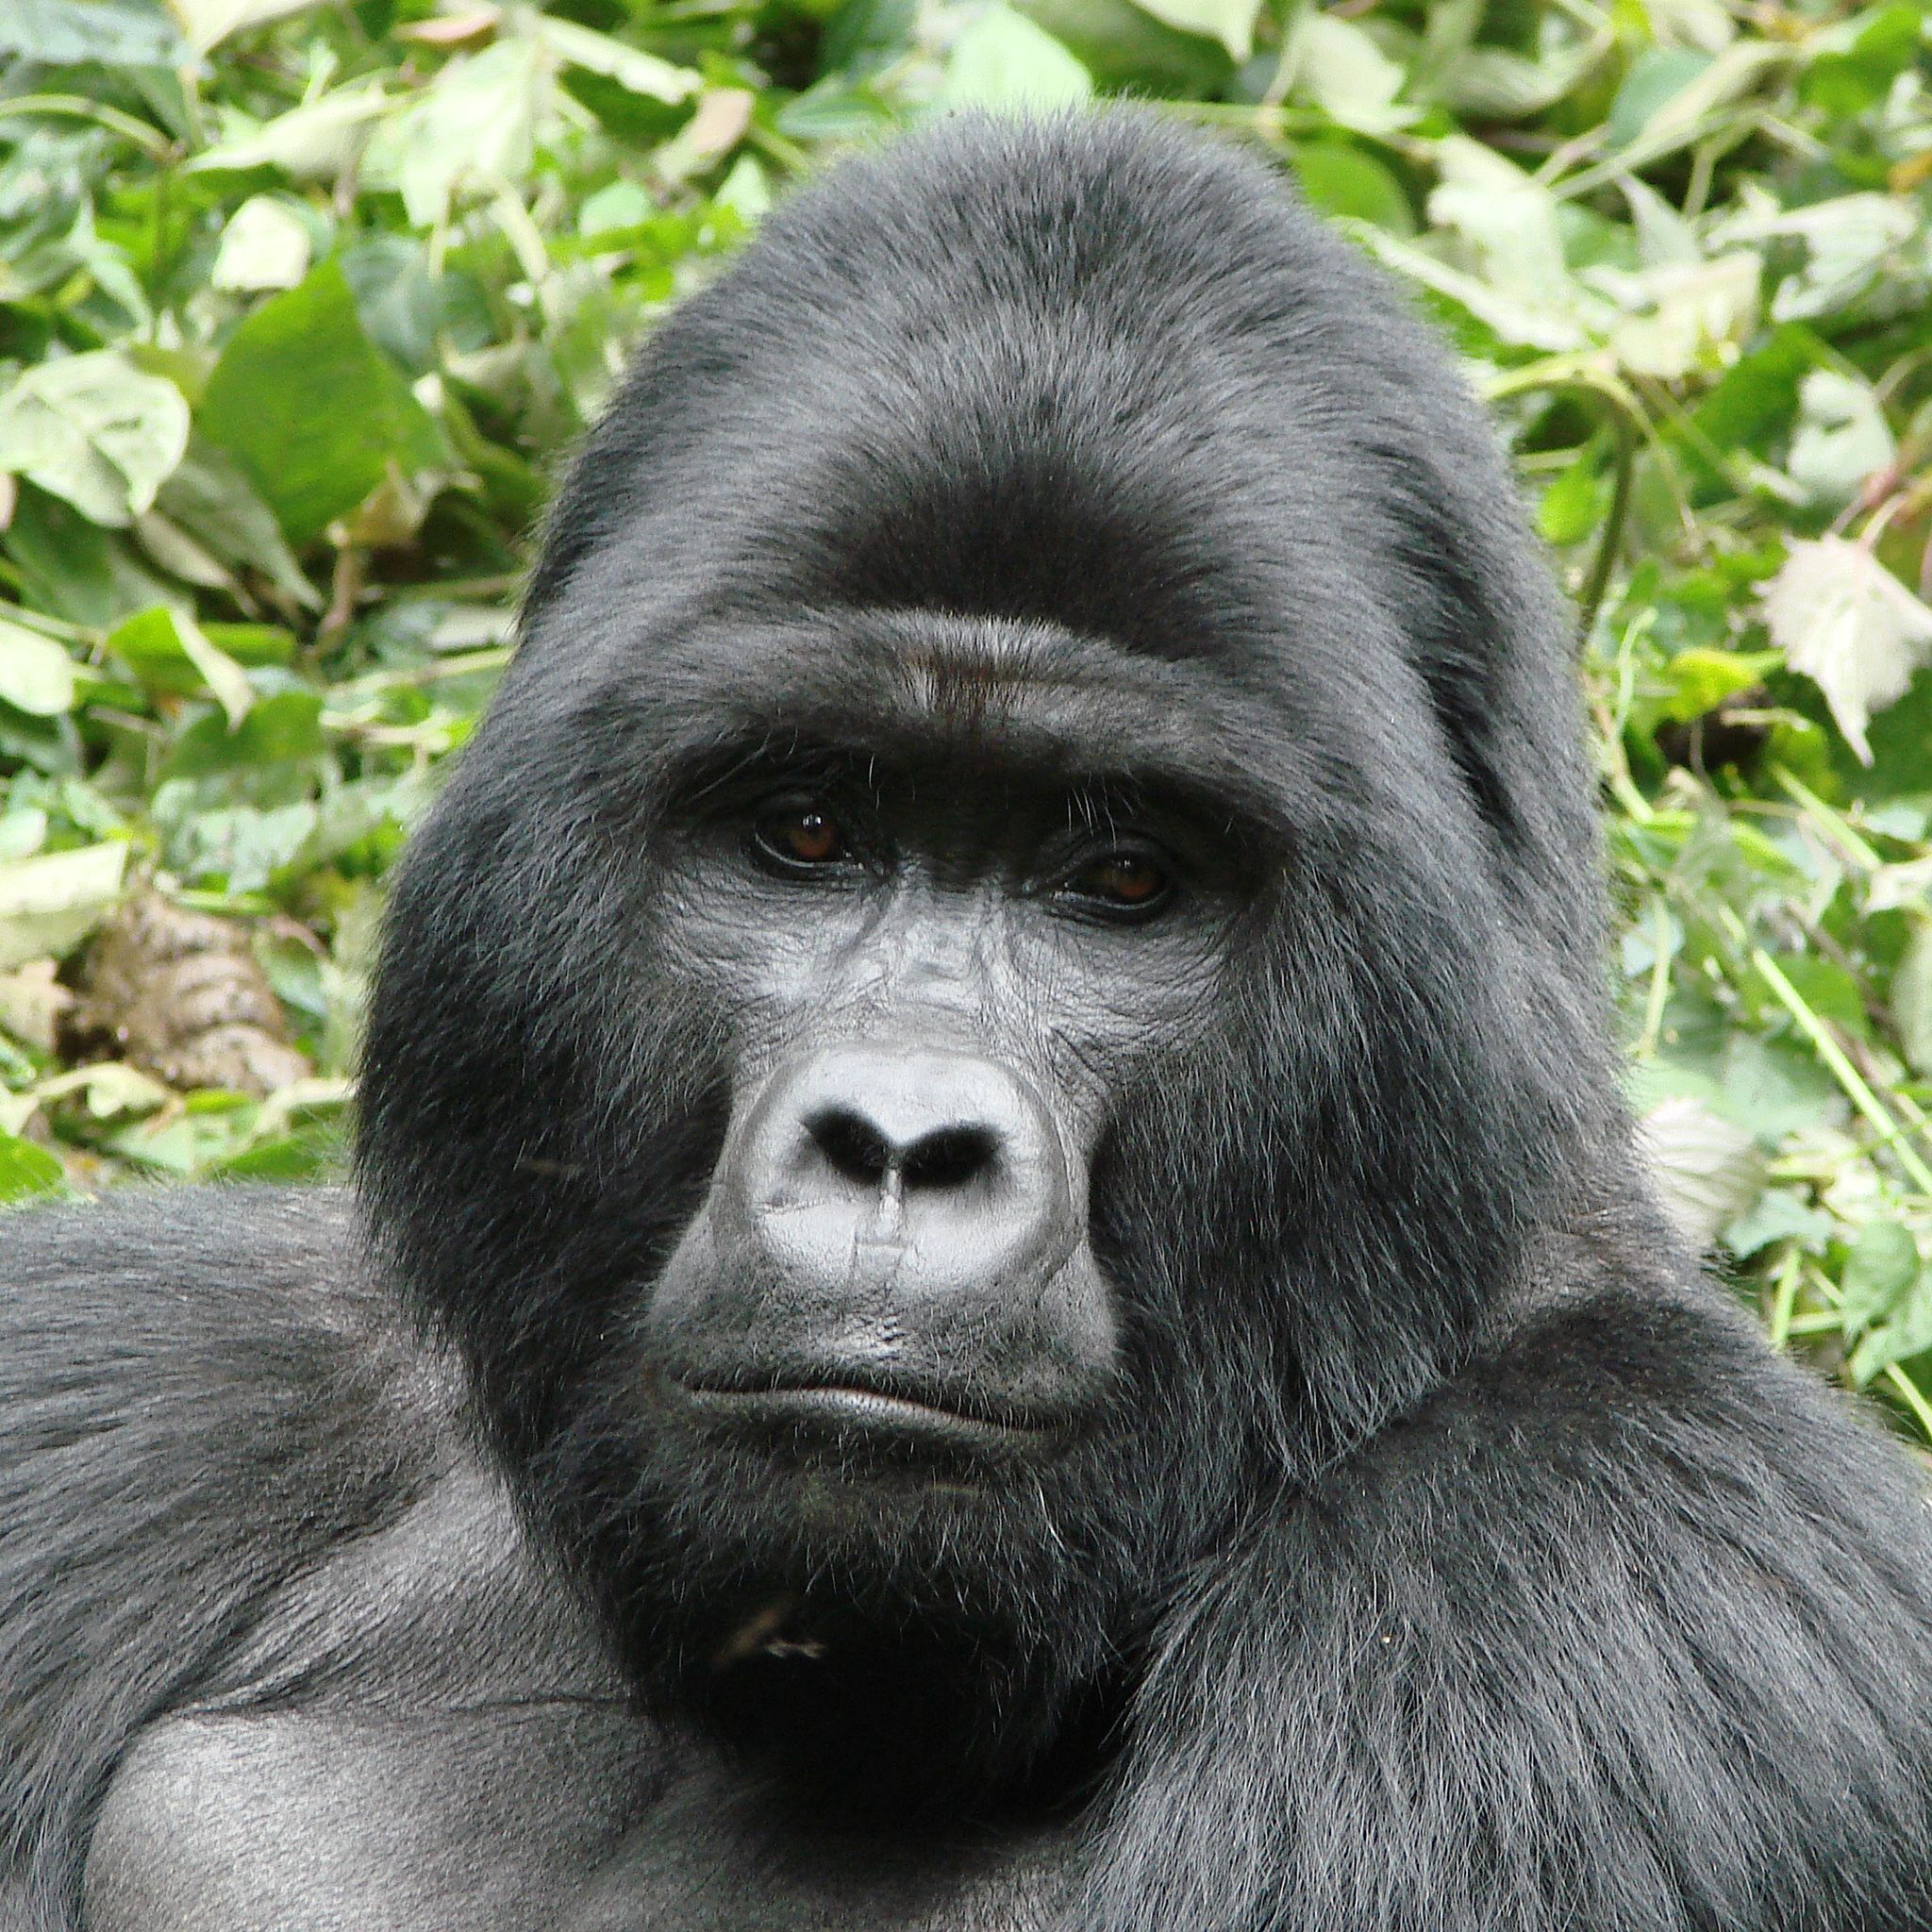 Mountain gorilla facts and photo